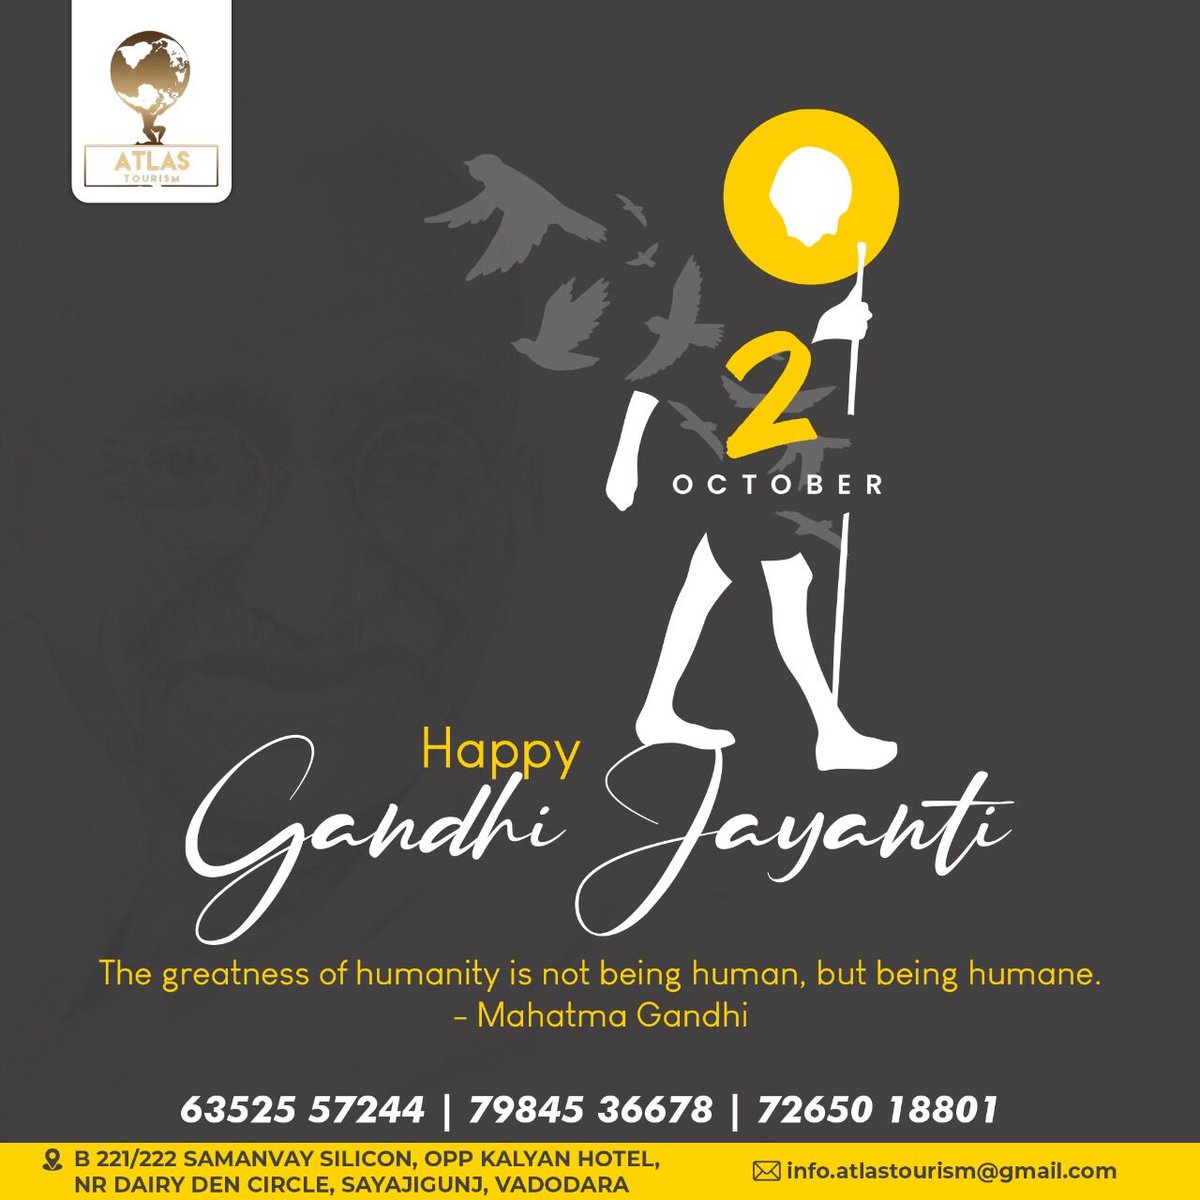 Gandhiji says, 'Live as if you were to die tomorrow.'

We say, 'Travel as if you were to die tomorrow.'

For All Your Tourism Plans Contact Us Today At:
📩info.atlastourism@gmail.com

#atlastourism #gandhijayanti #nationalfather #proudtobeindian #india #satyamevajayate #gandhiji